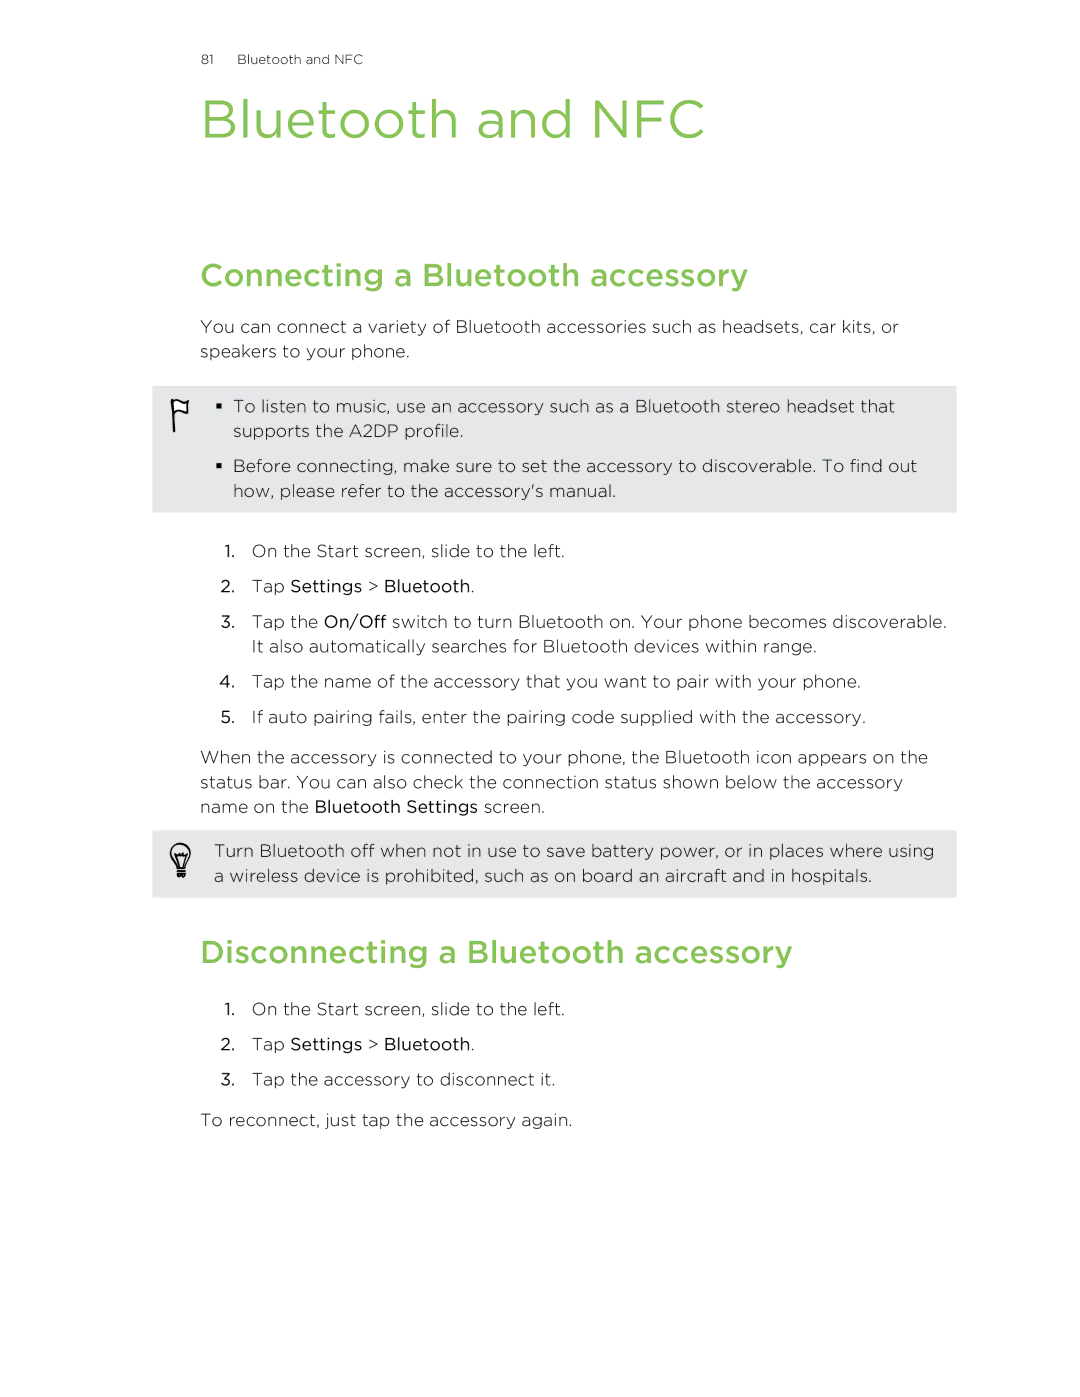 HTC 8X manual Bluetooth and NFC, Connecting a Bluetooth accessory, Disconnecting a Bluetooth accessory 